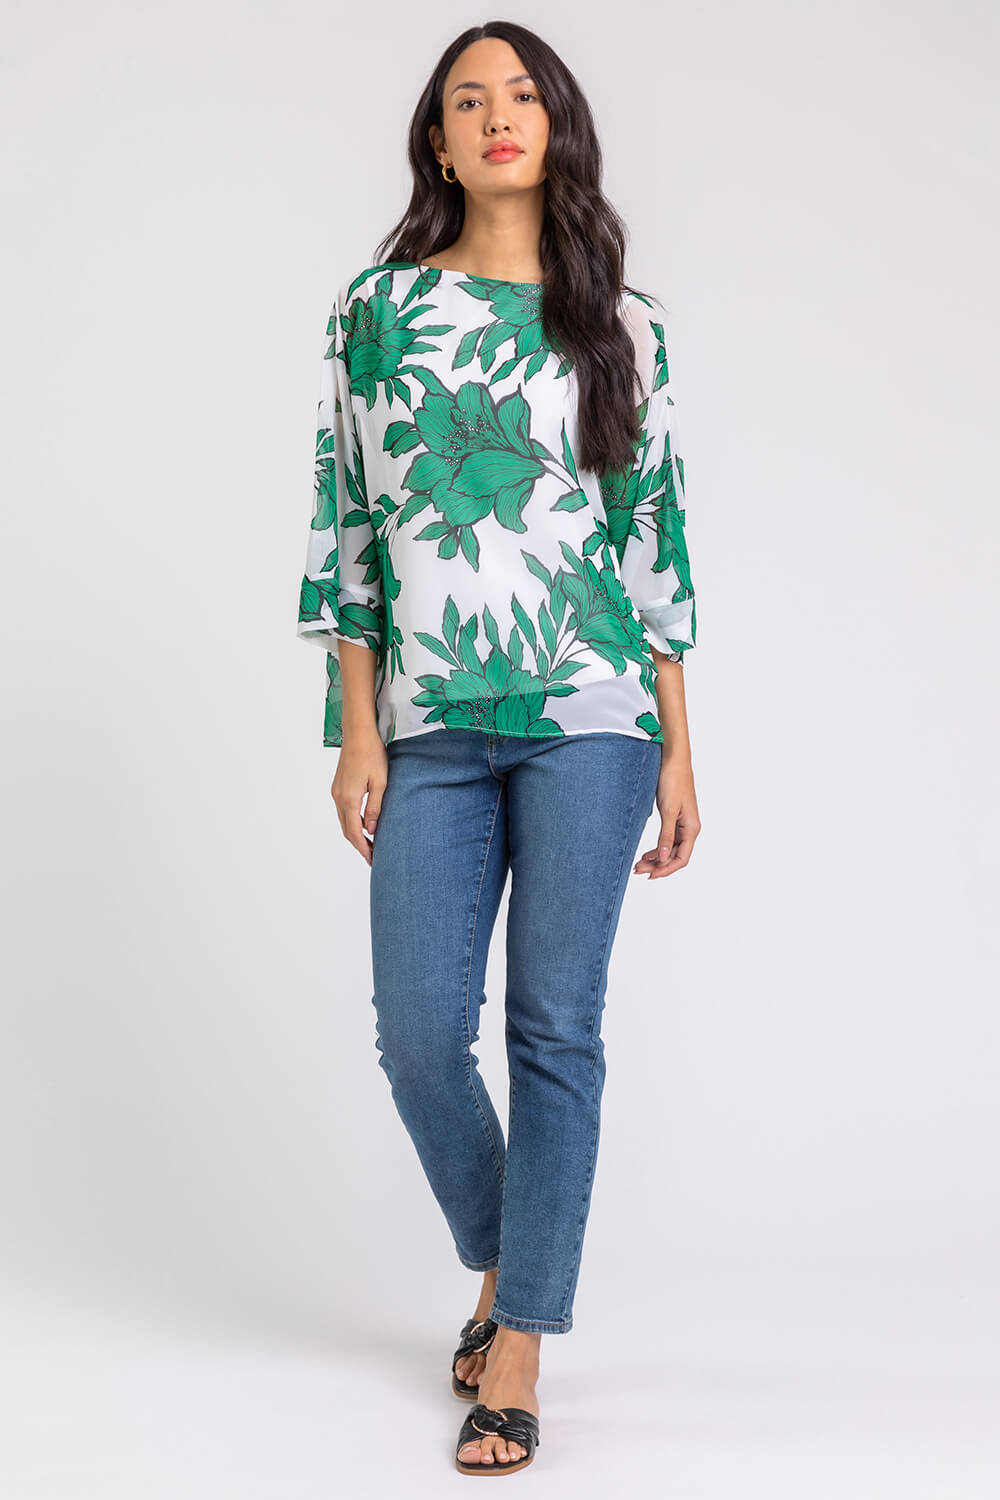 Green Floral Print Chiffon Overlay Top, Image 3 of 5